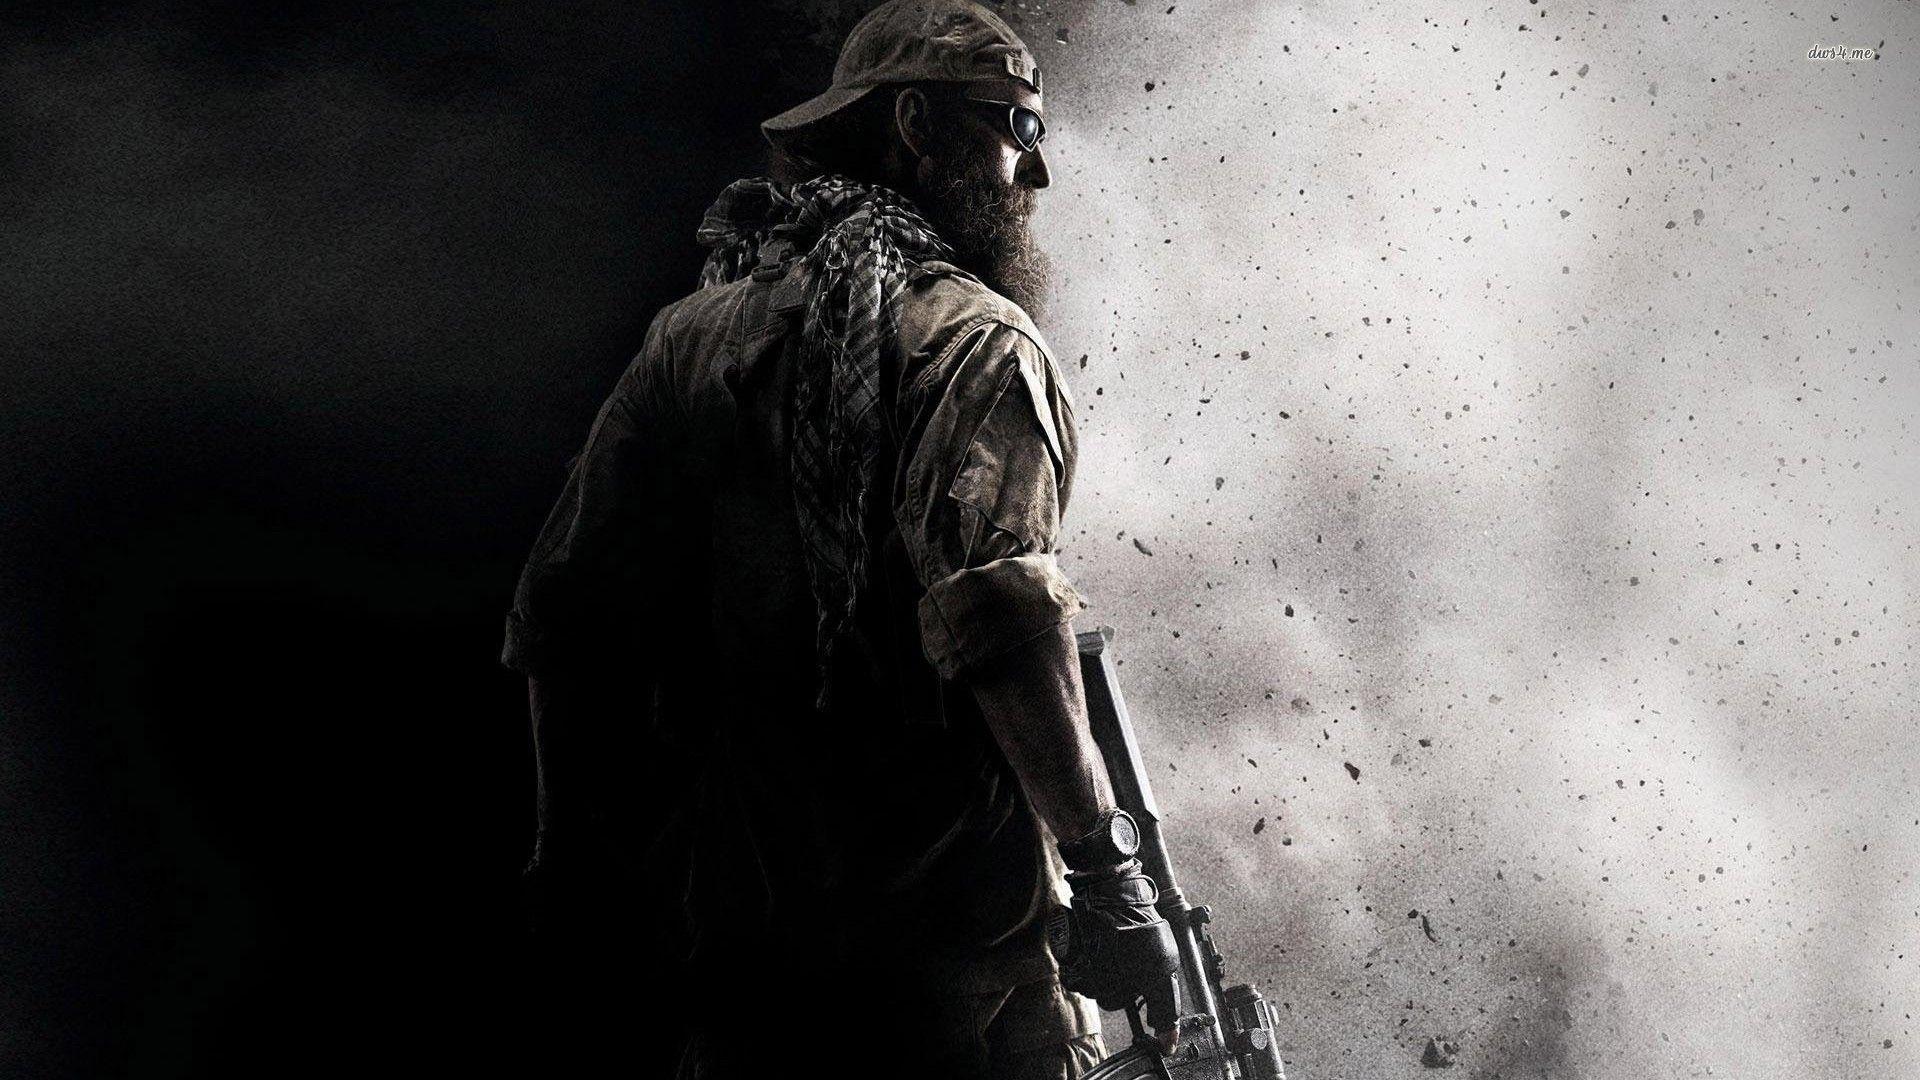 Wallpapers For > Medal Of Honor Wallpapers 1920x1080